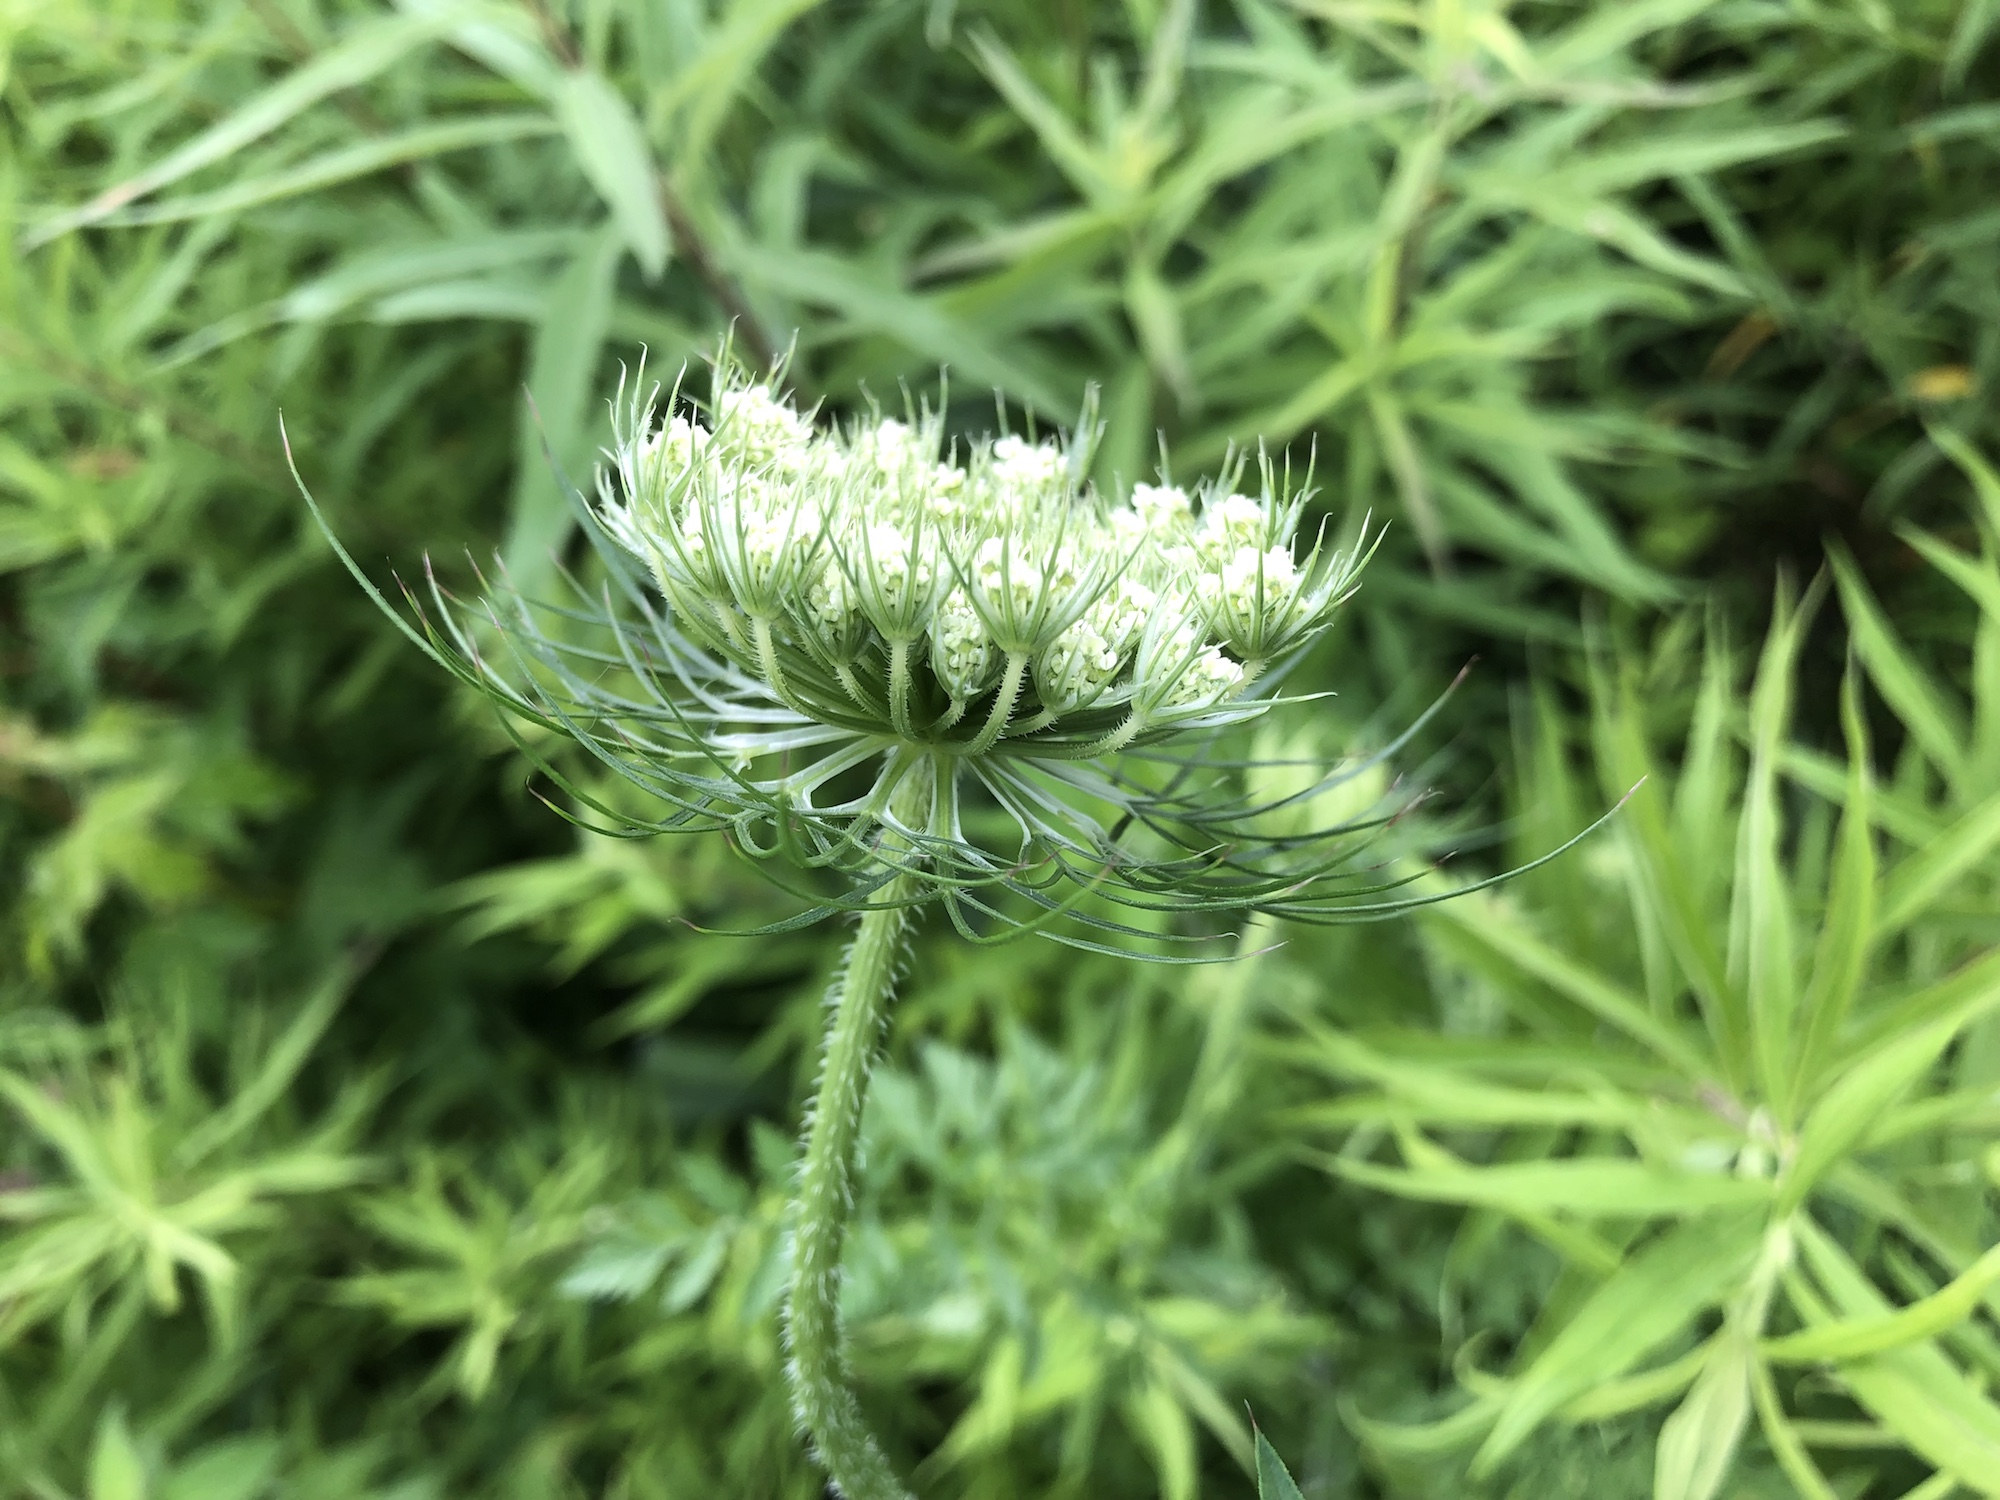 Queen Anne's Lace on bank of retaining pond on the corner of Nakoma Road and Manitou Way in Madison, WI on June 25, 2019.